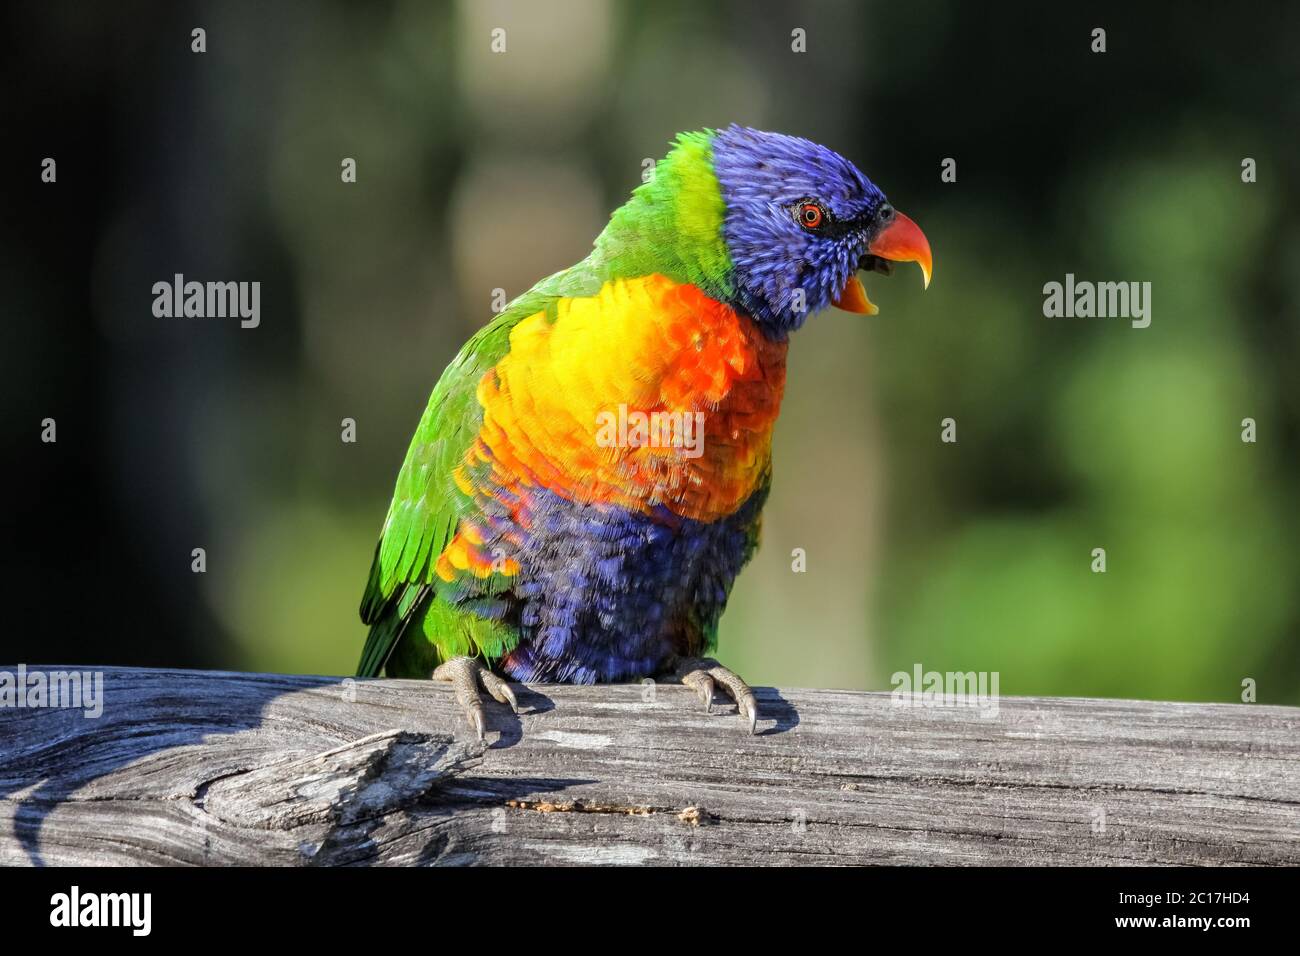 Close up of a colorful Rainbow lorikeet in the wild, Queensland Australia Stock Photo